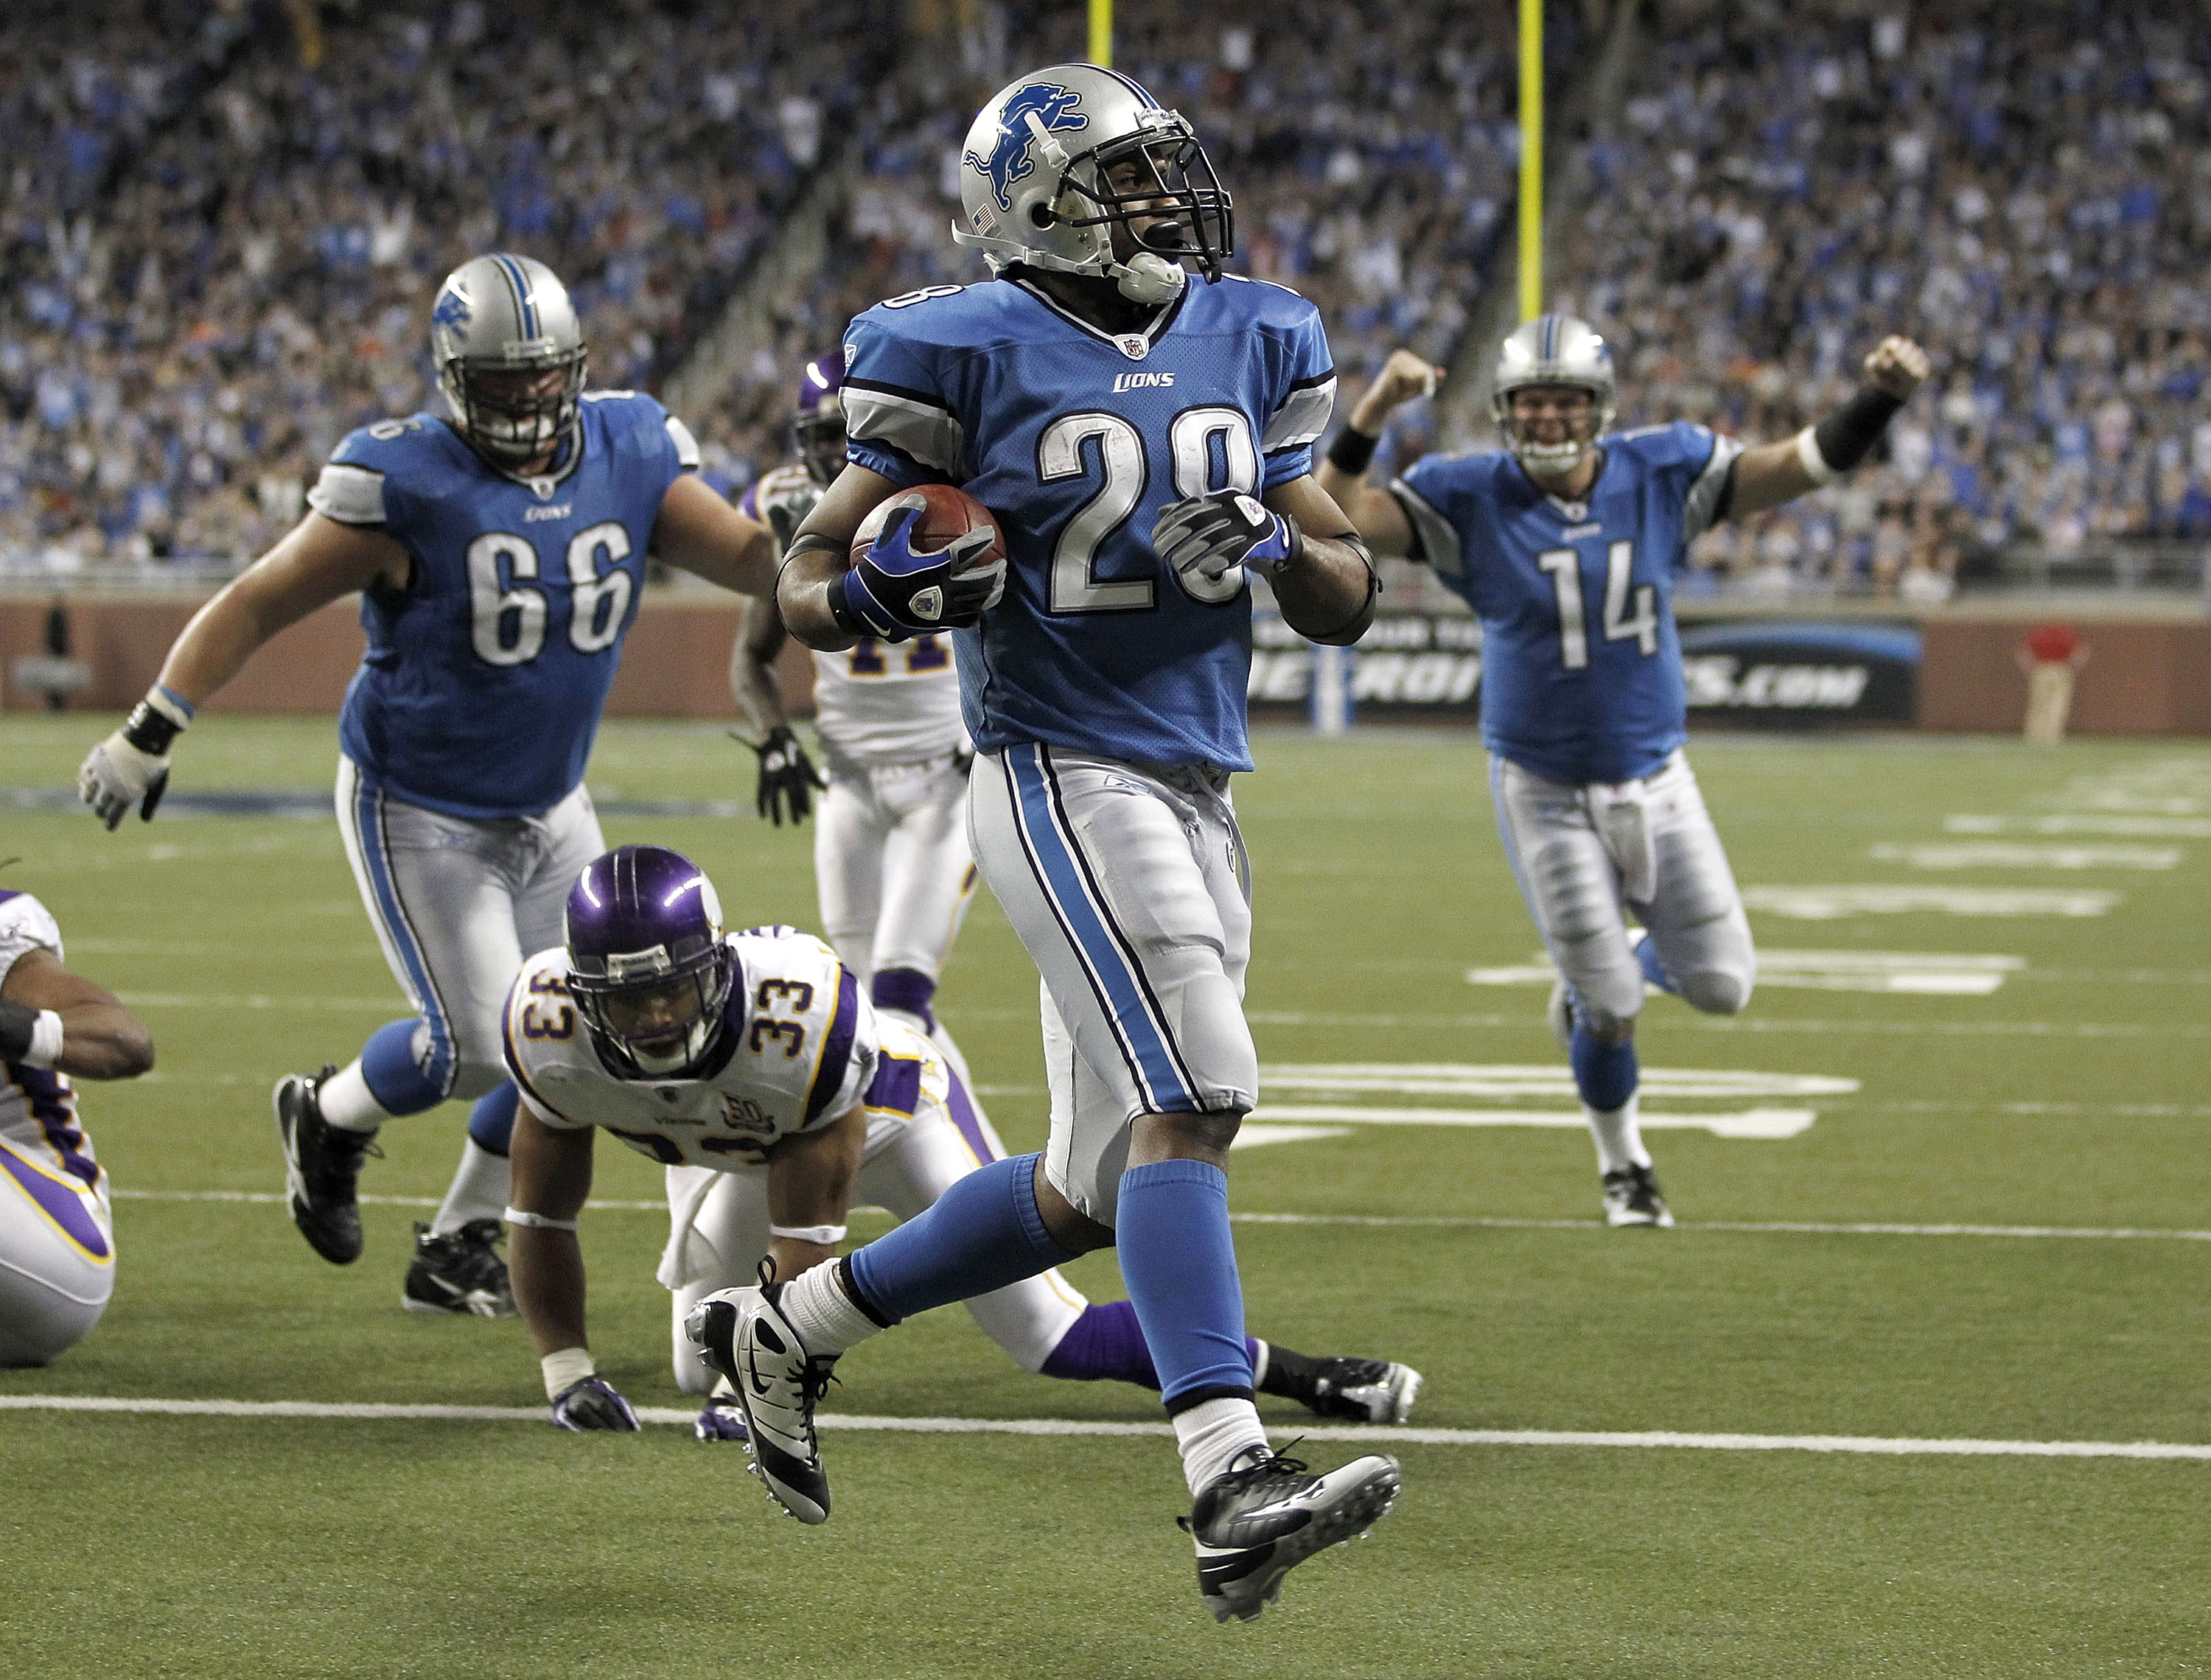 DETROIT, MI - JANUARY 02:  Maurice Morris #28 of the Detroit Lions gets in for a fouth quarter touchdown in front of Jamarca Sanford #33 of the Minnesota Vikings at Ford Field on January 2, 2011 in Detroit, Michigan. Detroit won the game 20-13.  (Photo by